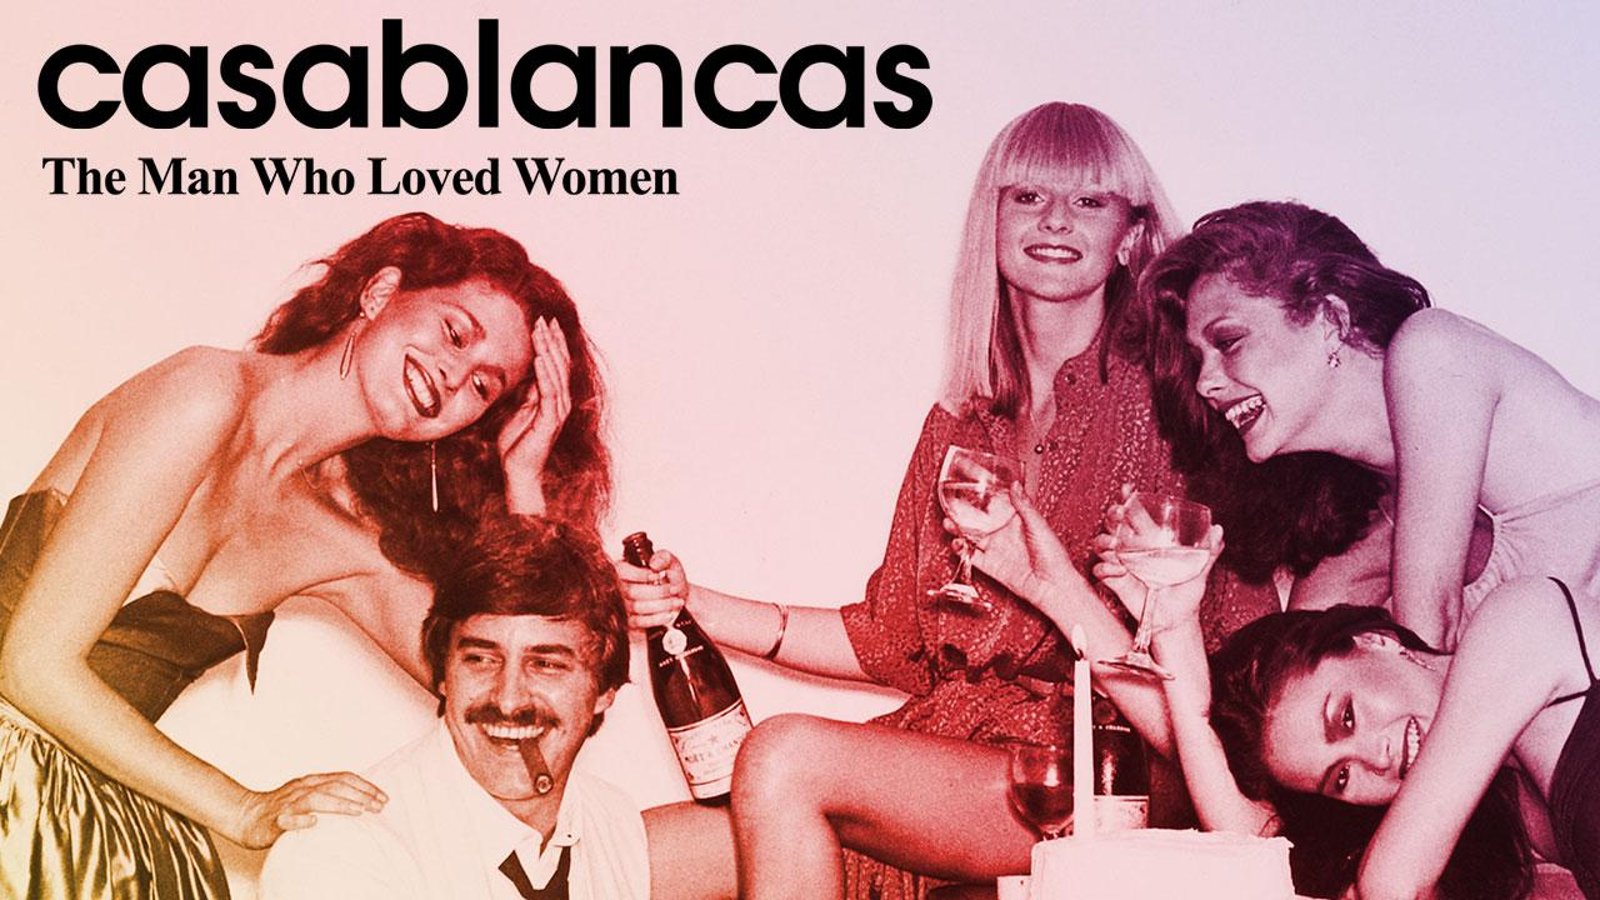 Casablancas: The Man Who Loved Women - The Man Who Invented the Supermodel